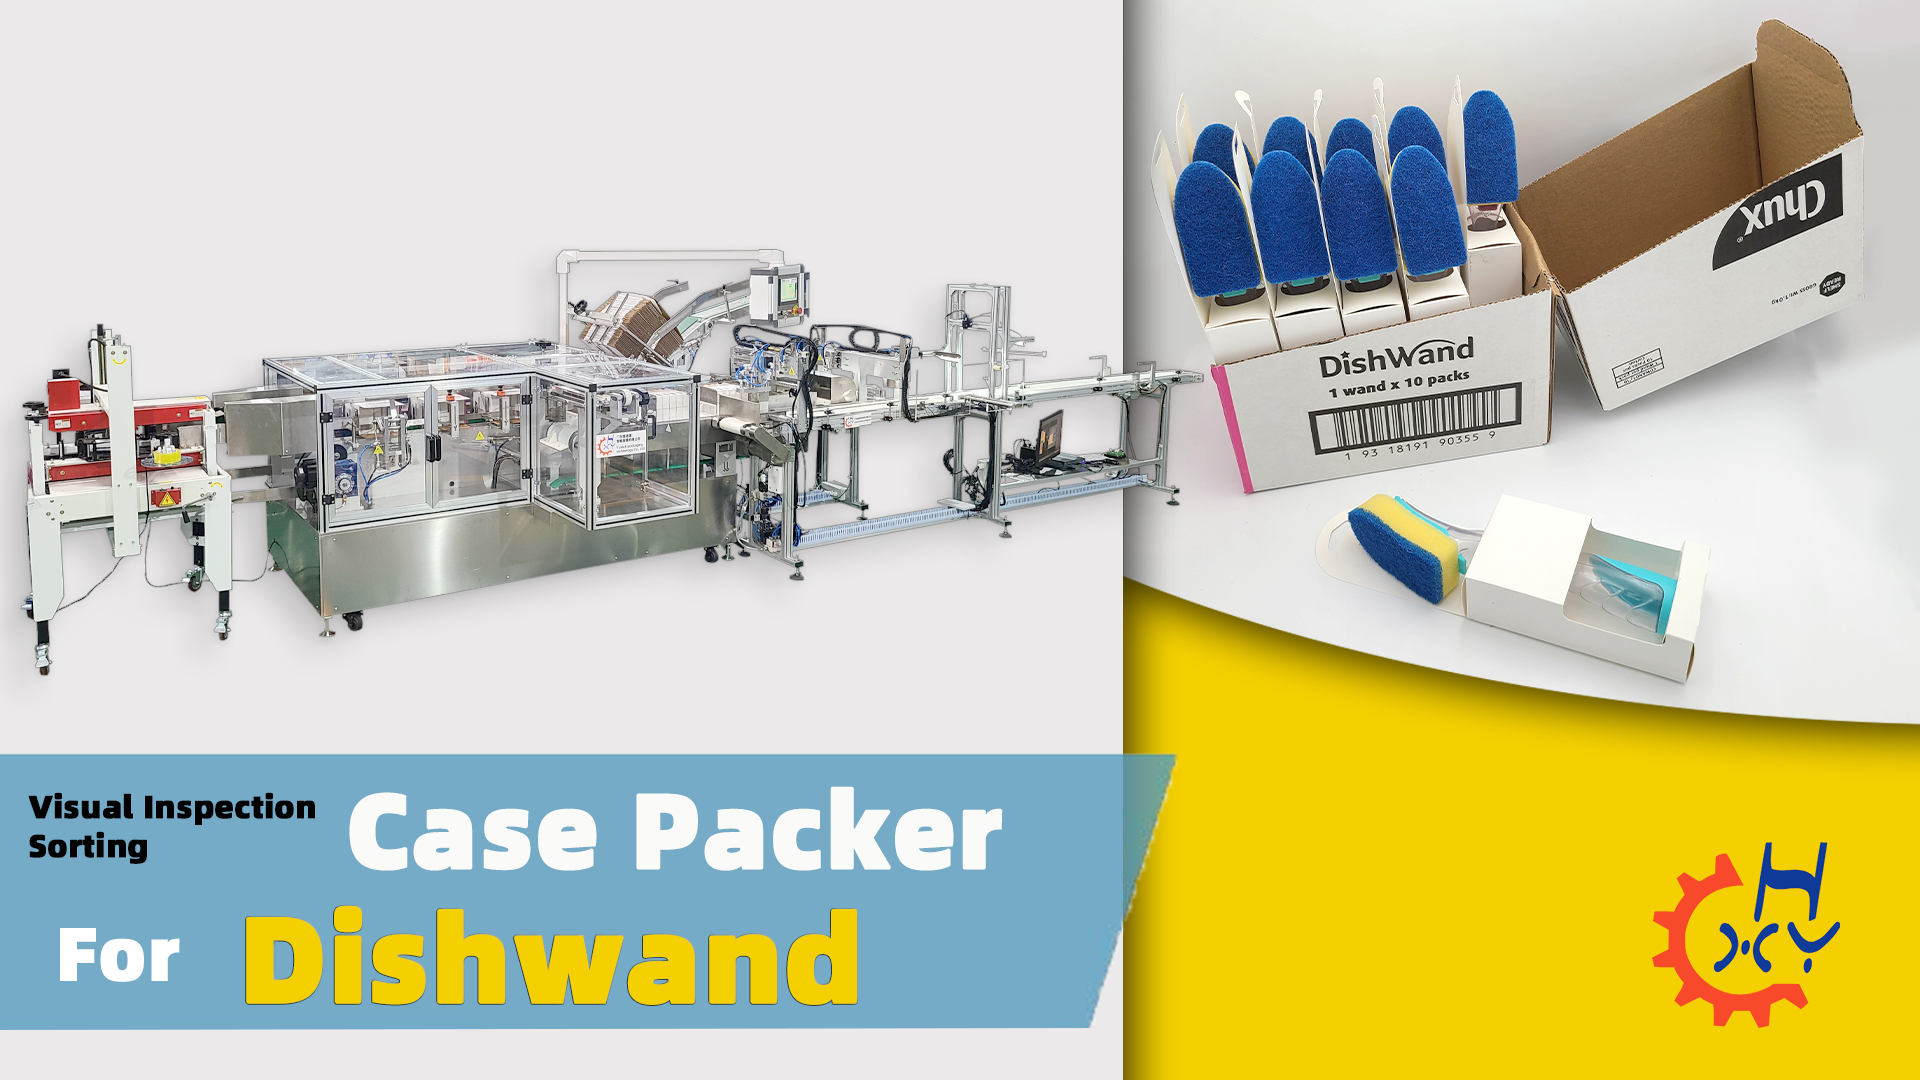 Visual Inspection Sorting Automatic Case Packer For Dishwand